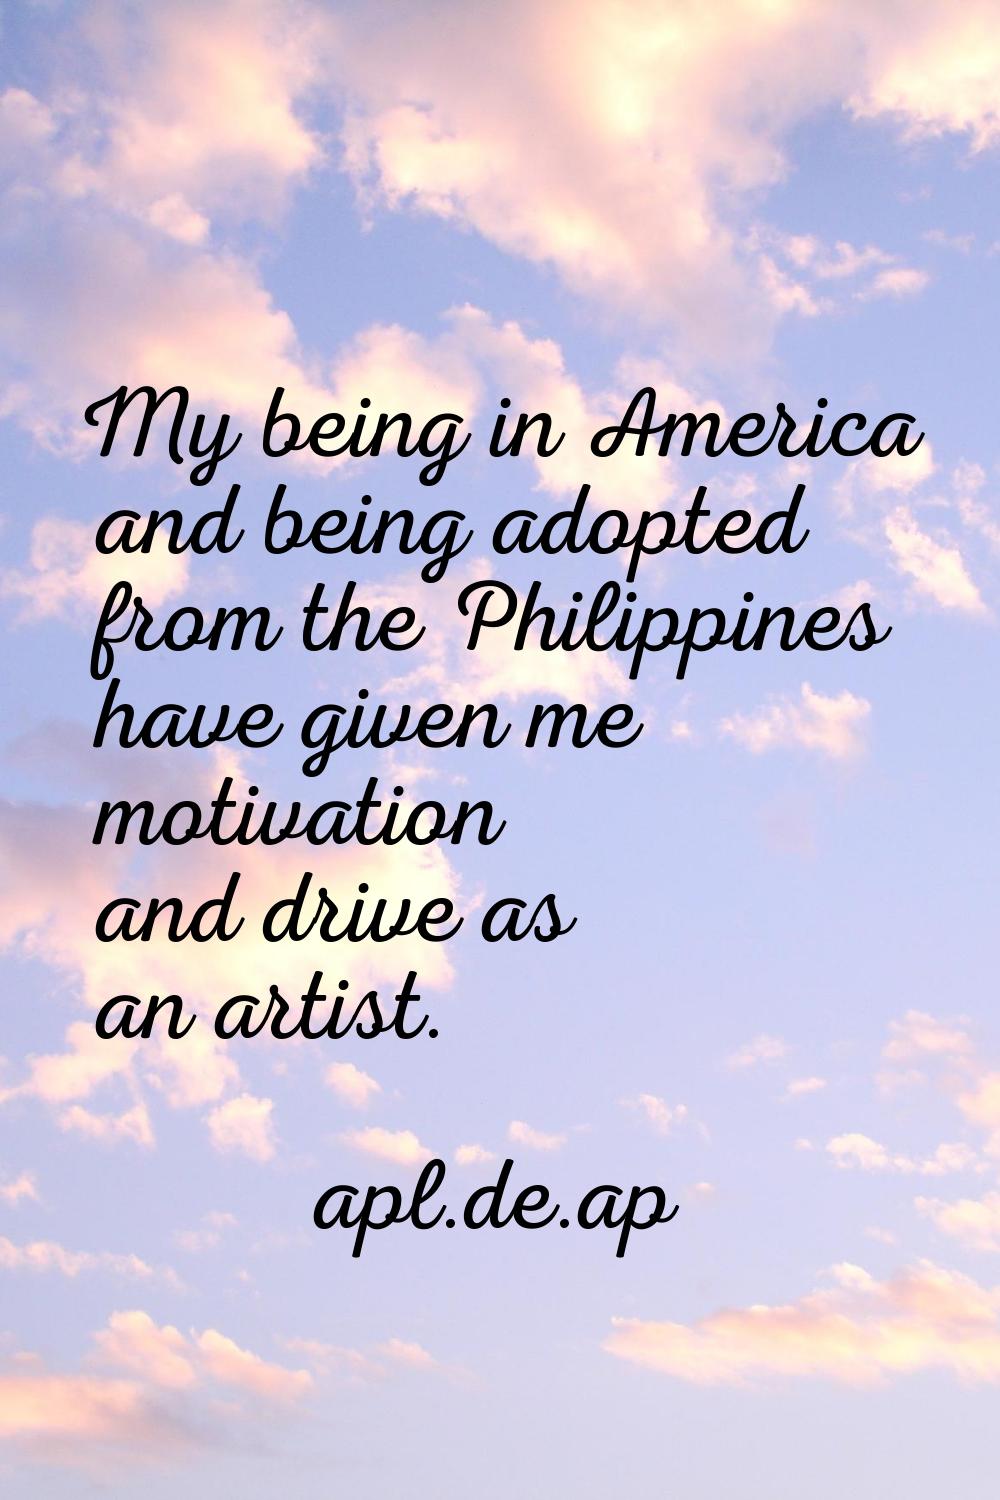 My being in America and being adopted from the Philippines have given me motivation and drive as an